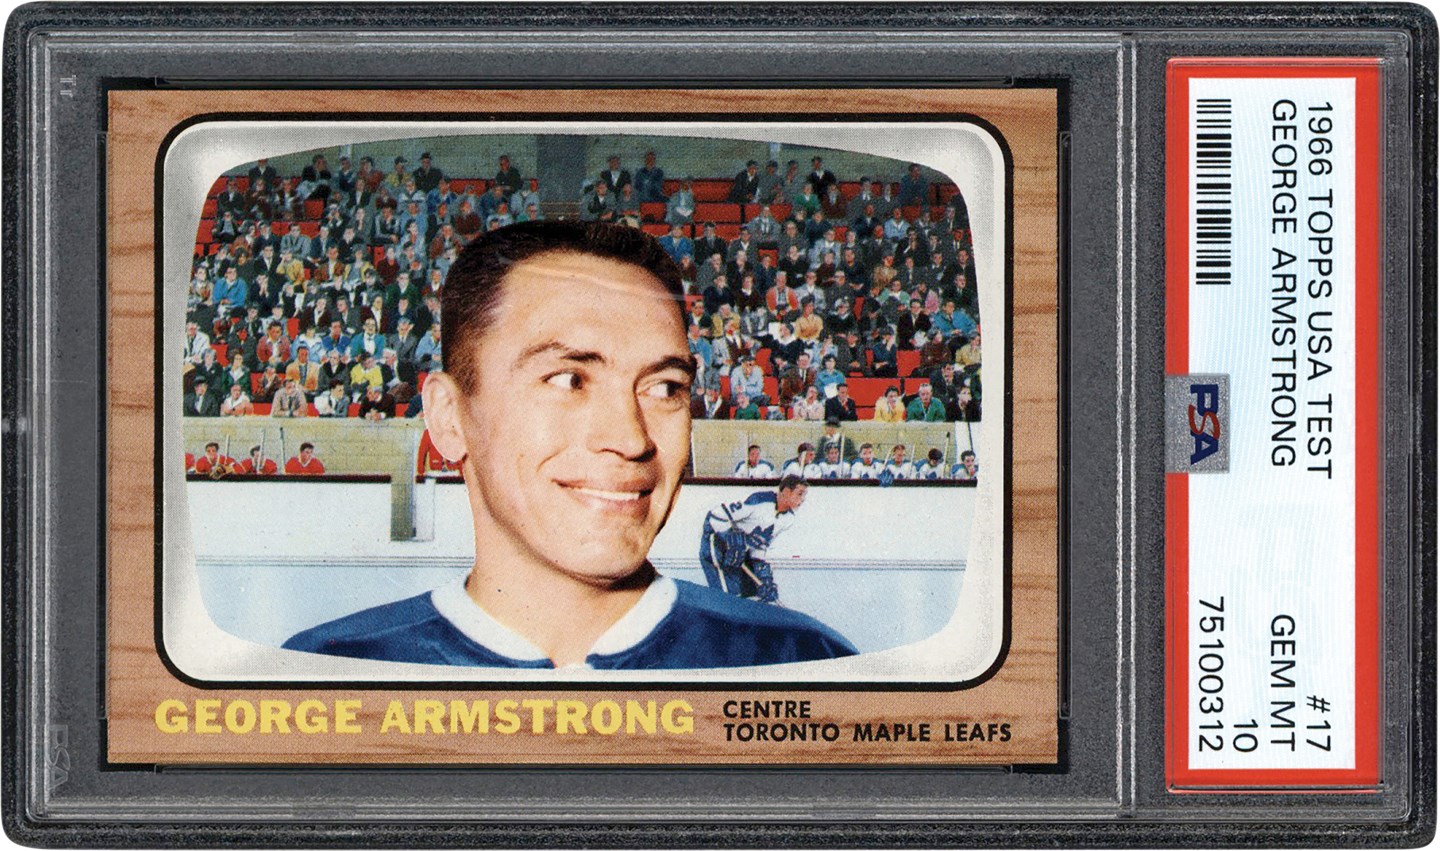 Hockey Cards - 1966 Topps USA Test Hockey #17 George Armstrong PSA GEM-MT 10 - One of Three 10s in Entire Set (Pop 1 of 1)